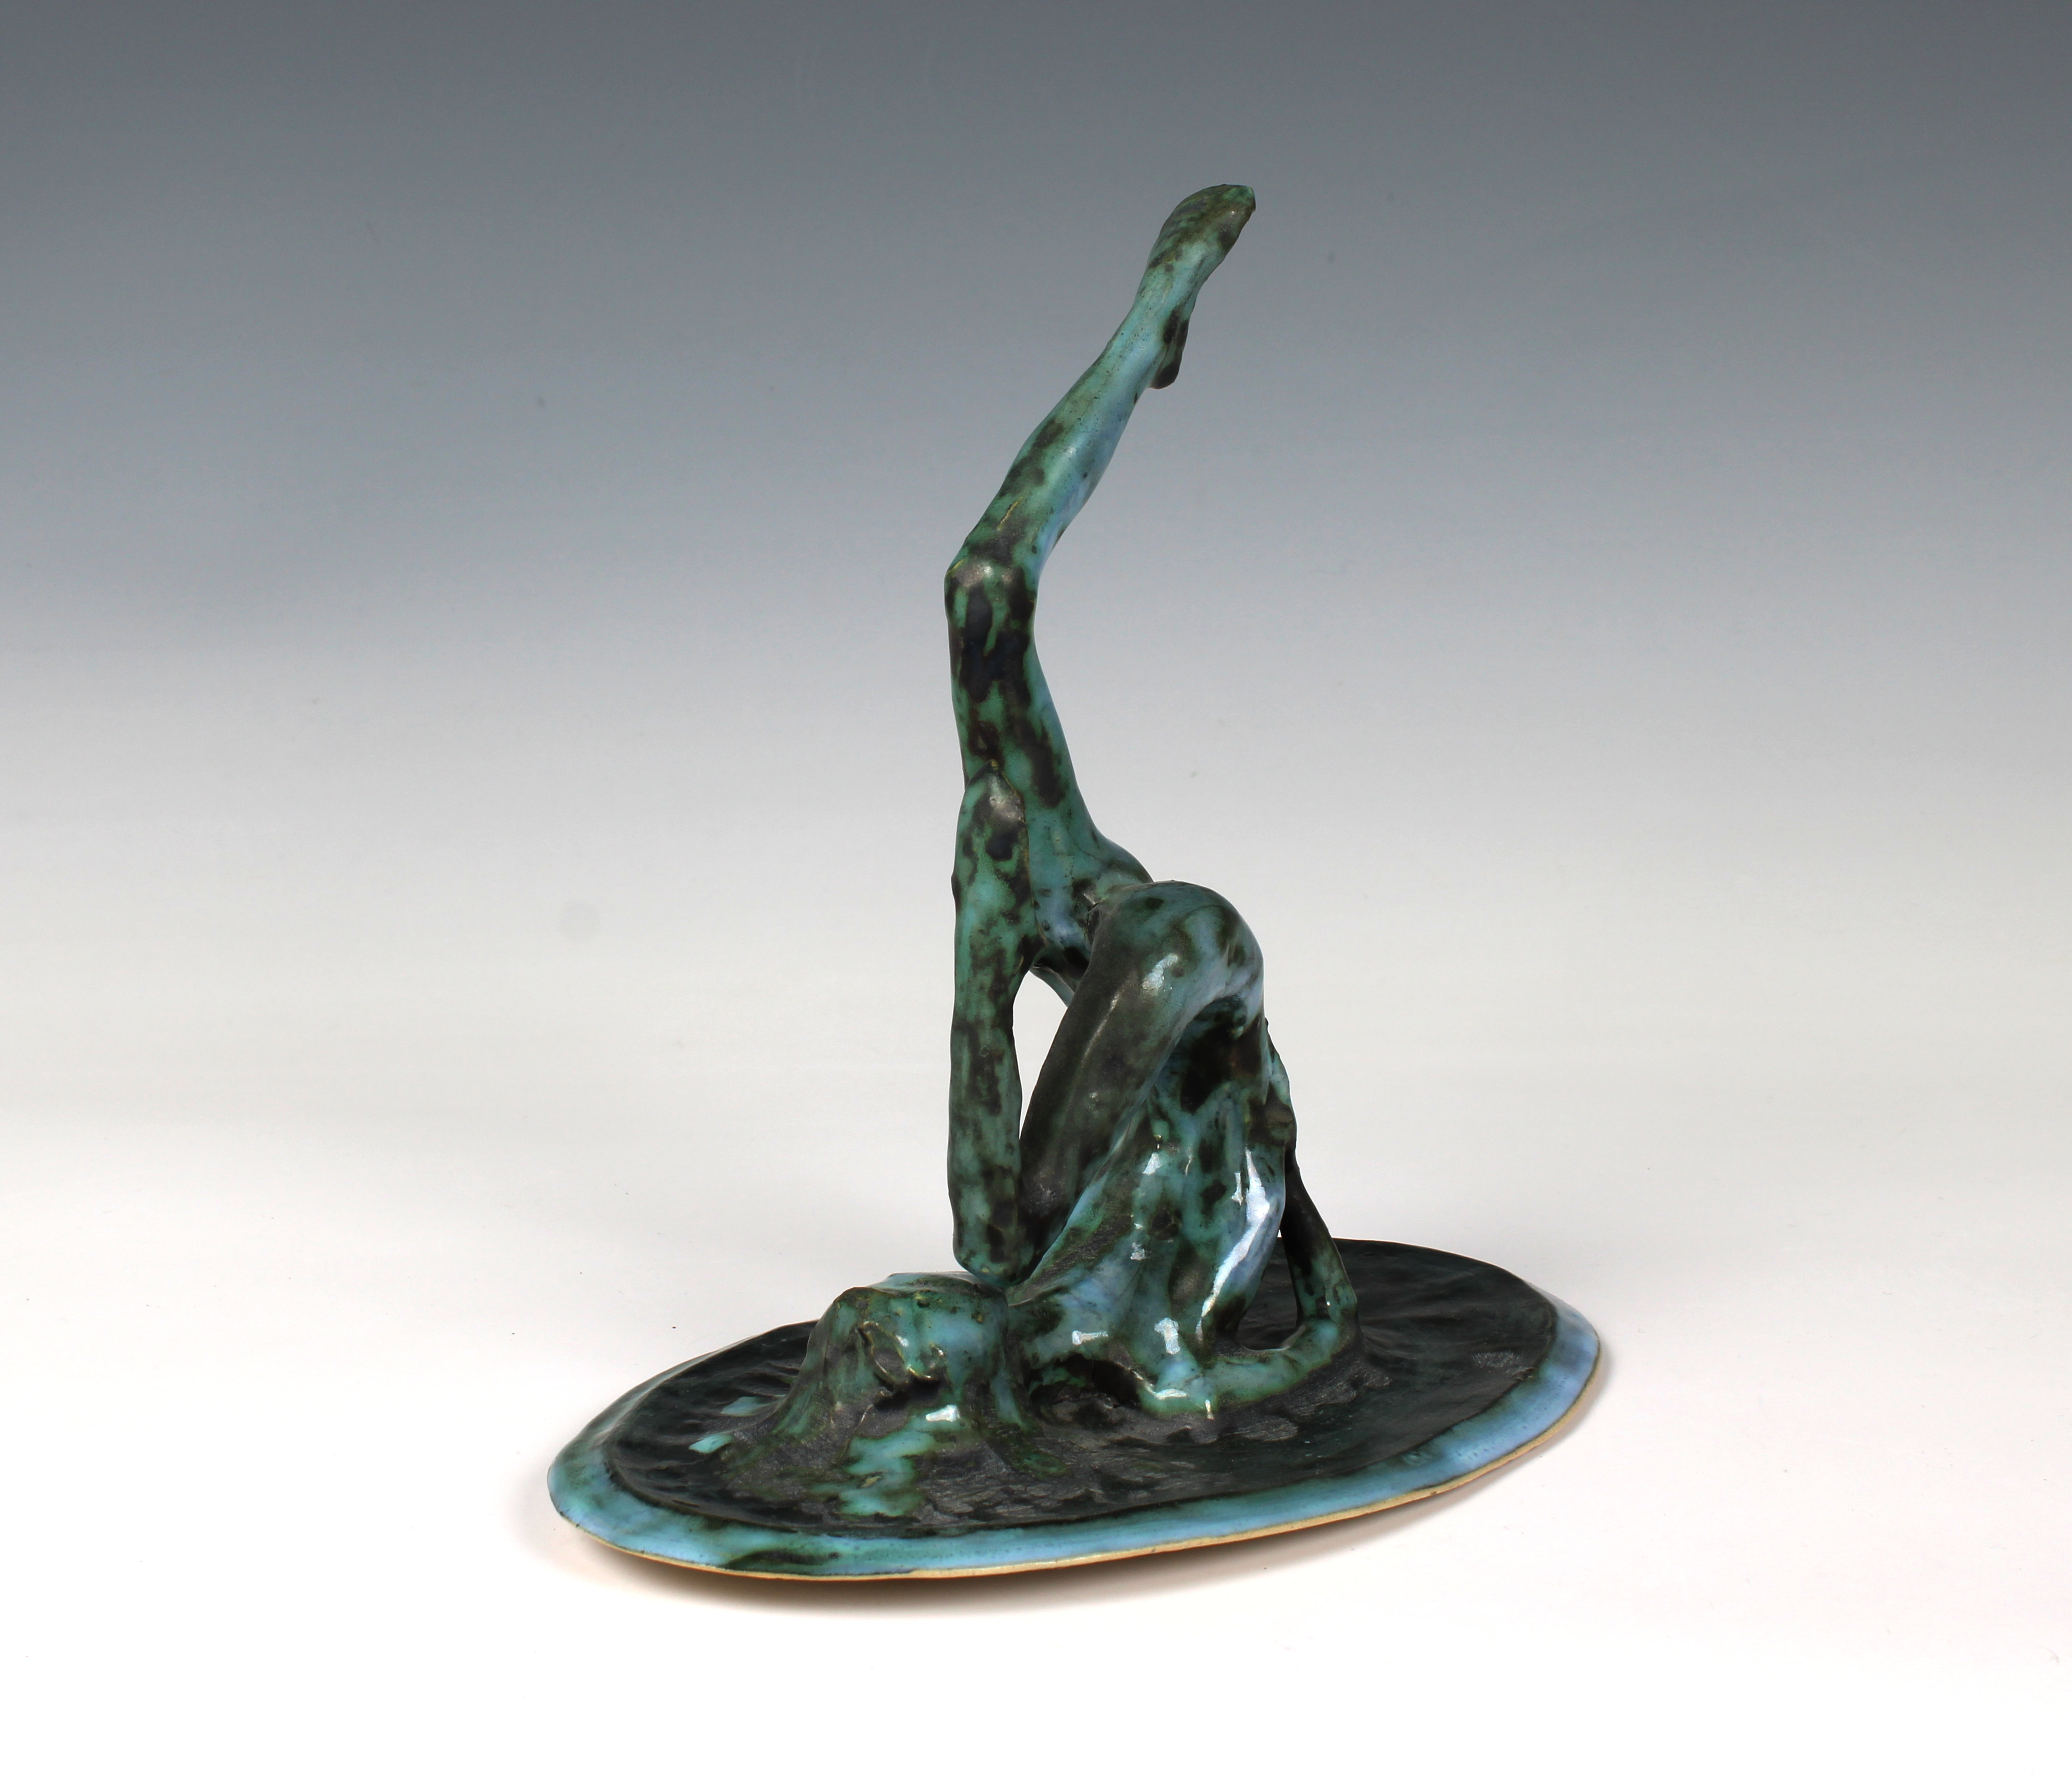 Elizabeth Ann Macphail (1939-89) glazed sculpture featuring a stylised figure doing exercise - Image 2 of 7